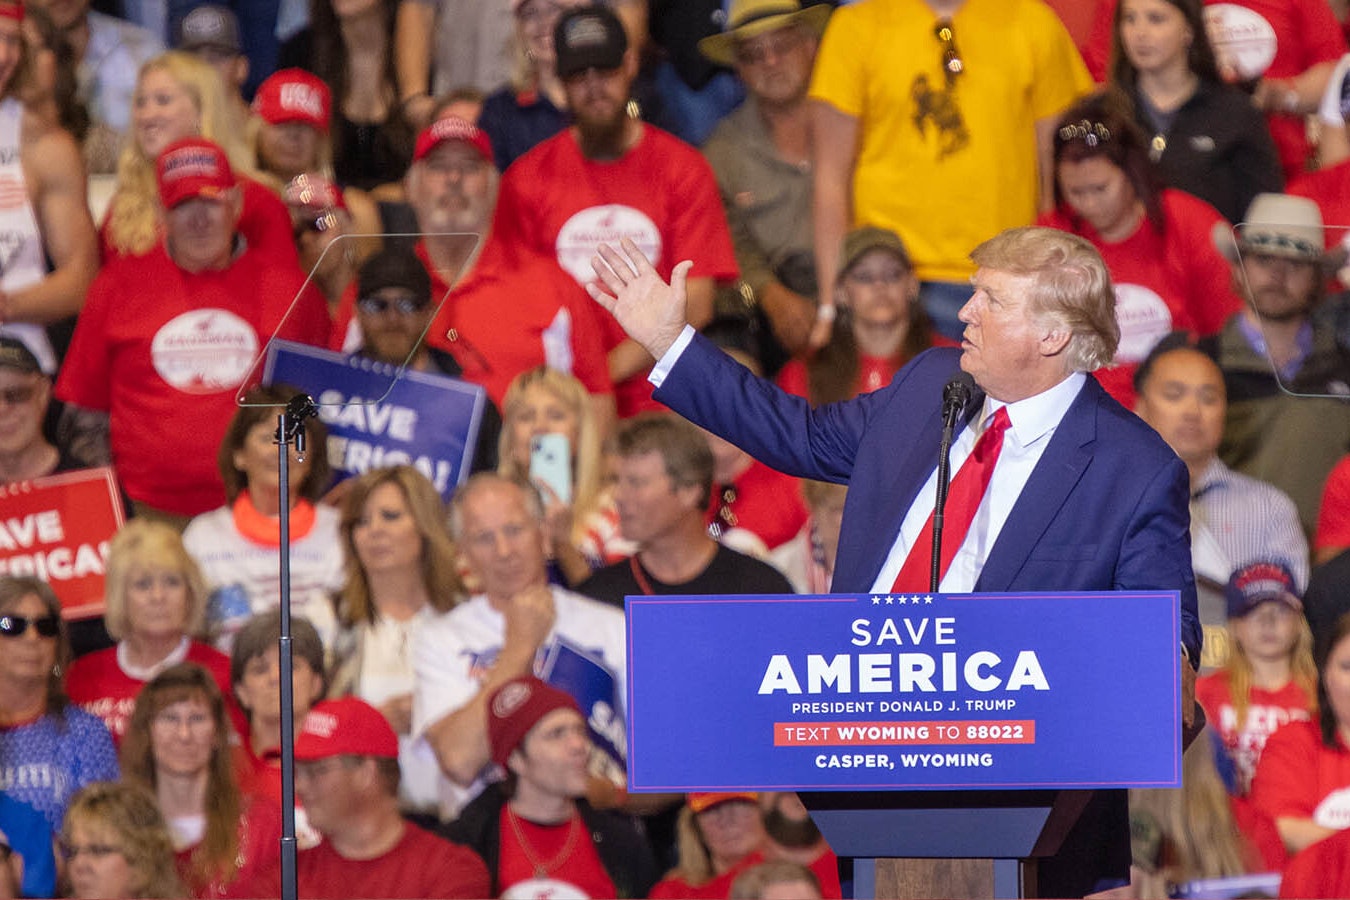 Donald Trump was the overwhelming favorite for president in Wyoming in 2016 and 2020, and he maintains that support going into the 2024 election season.